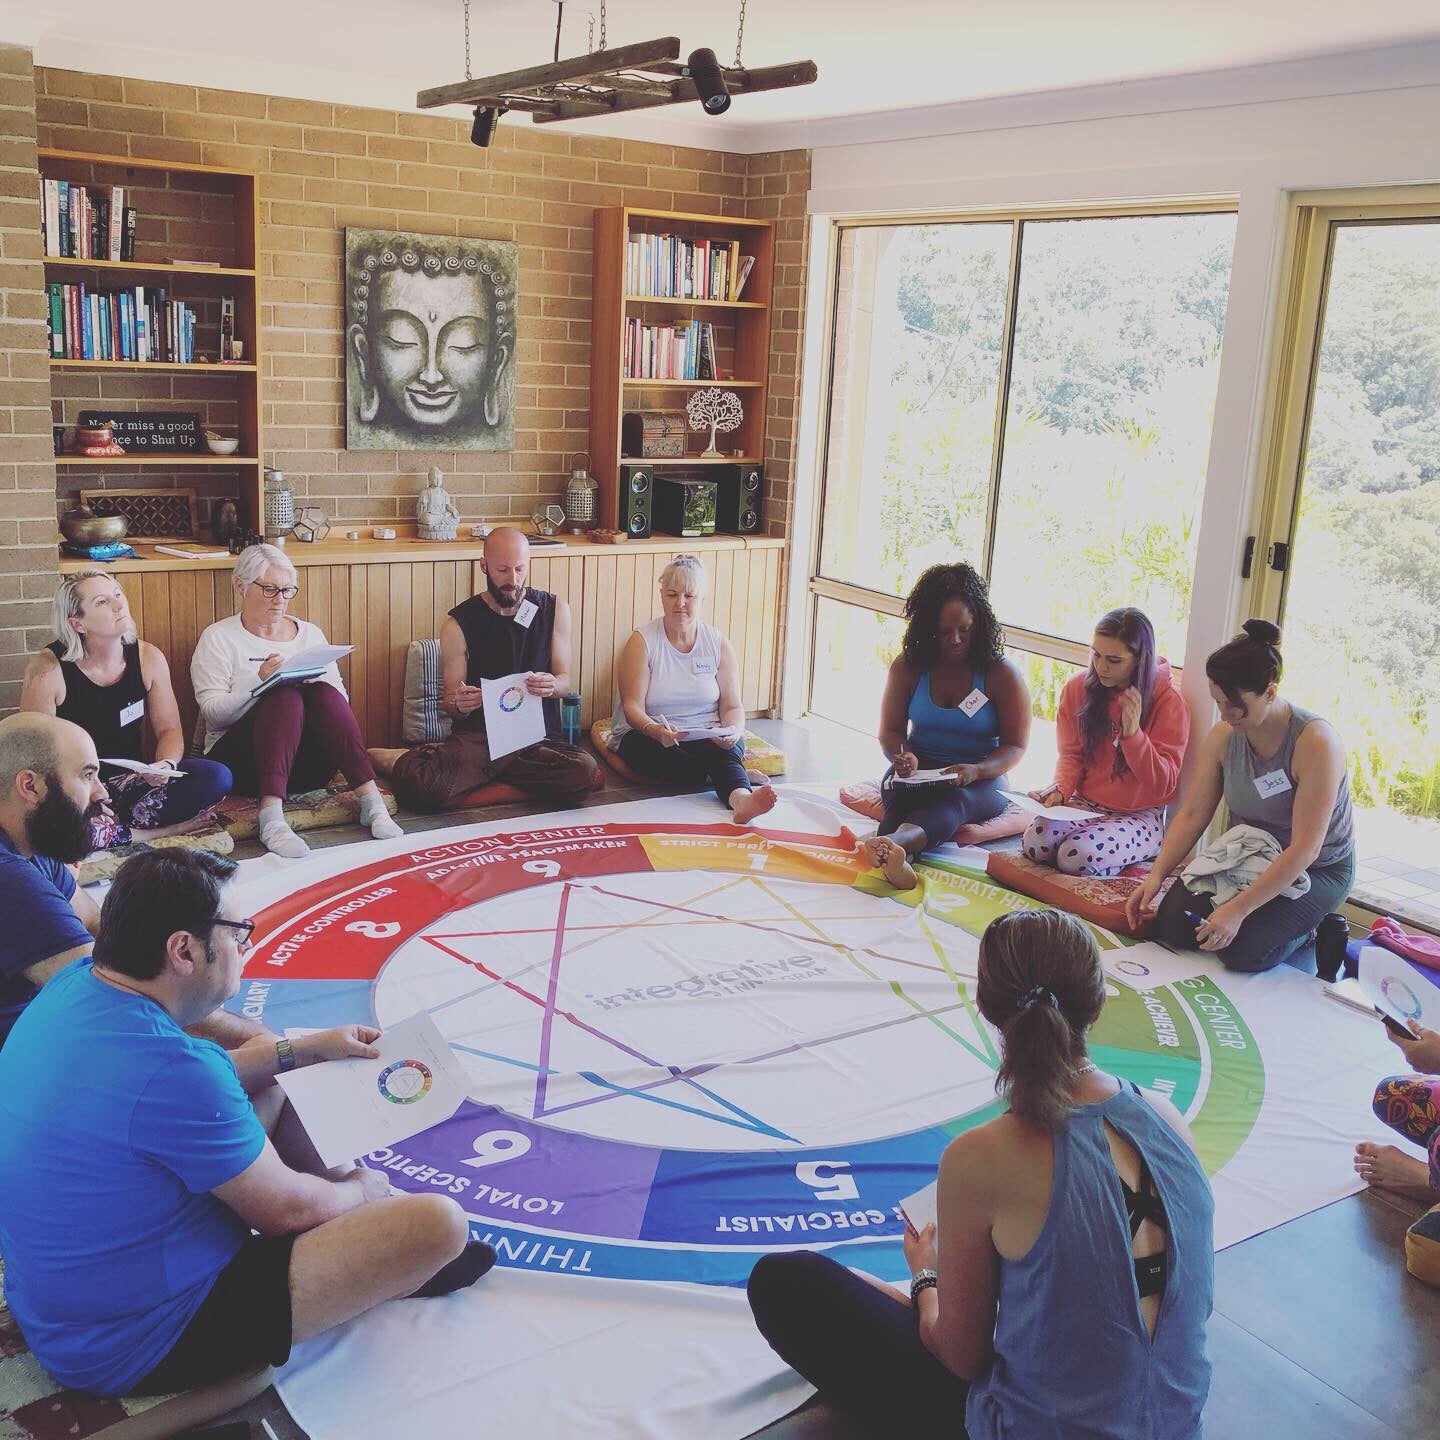 Fully Booked - 'Explore Yourself & Free Yourself' - One day Enneagram Retreat at Kodama - Sun Aug 9th 2020